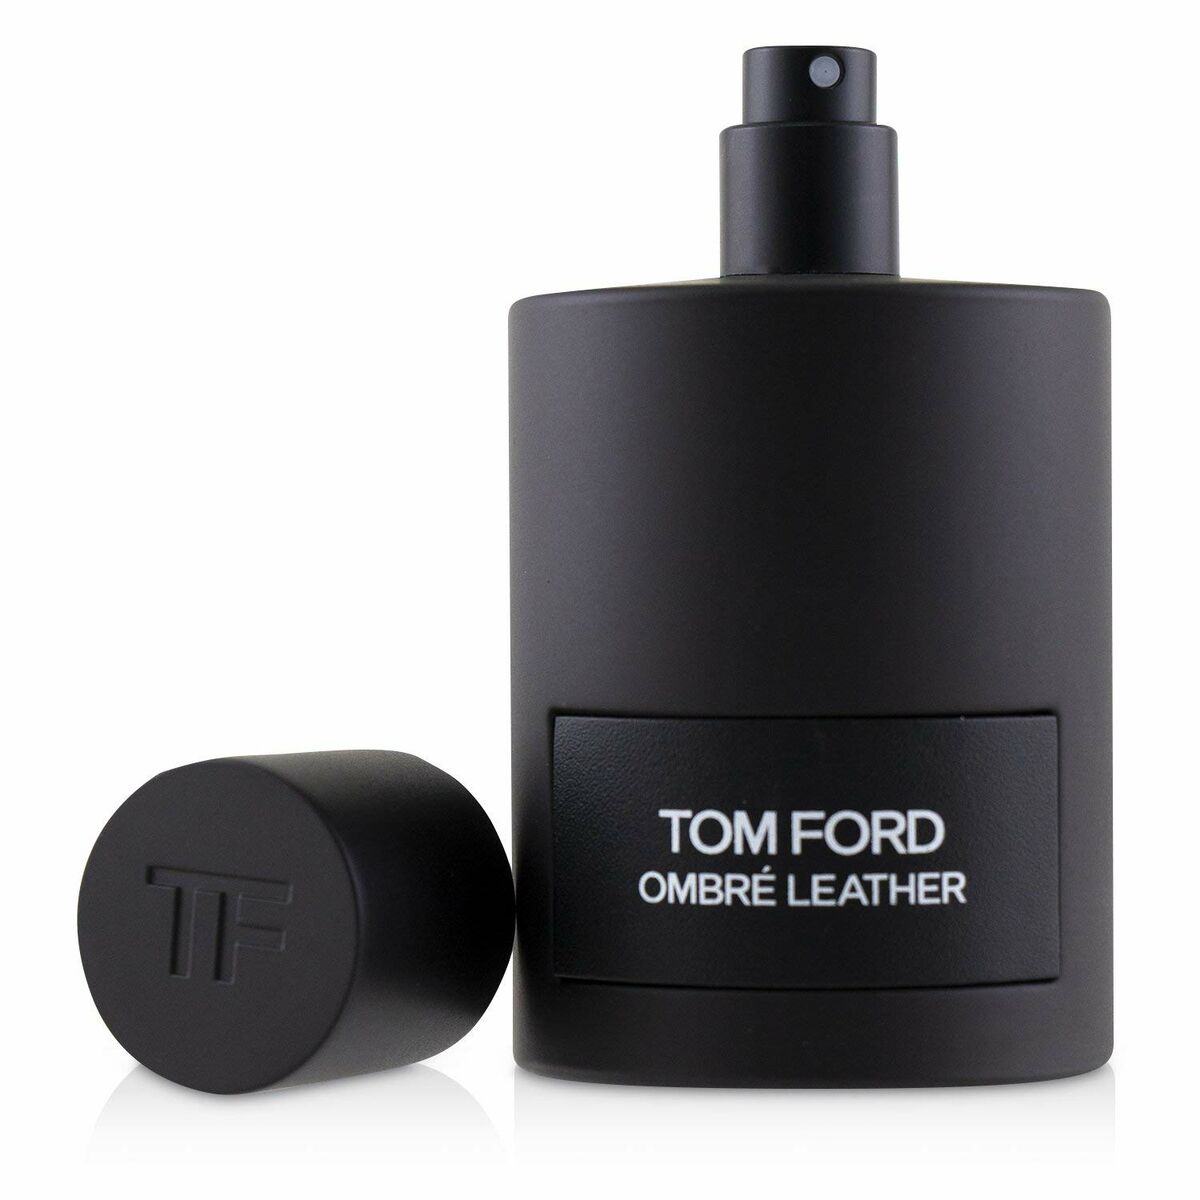 Parfum Unisexe Tom Ford EDP Ombre Leather 100 ml